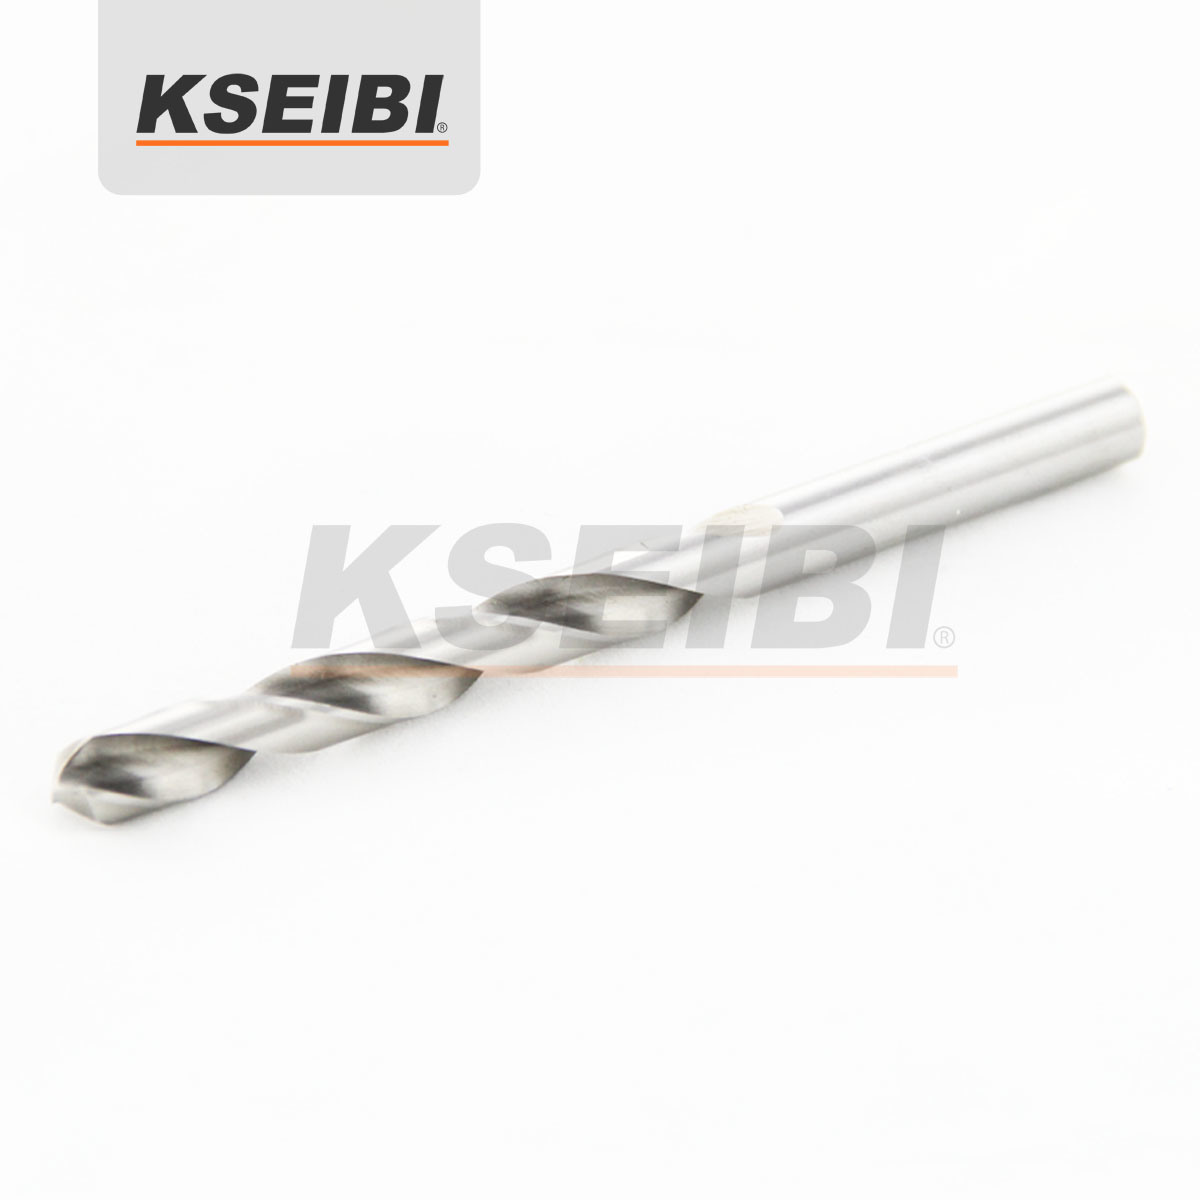 High Quality HSS Drill Bit for Drilling Metal